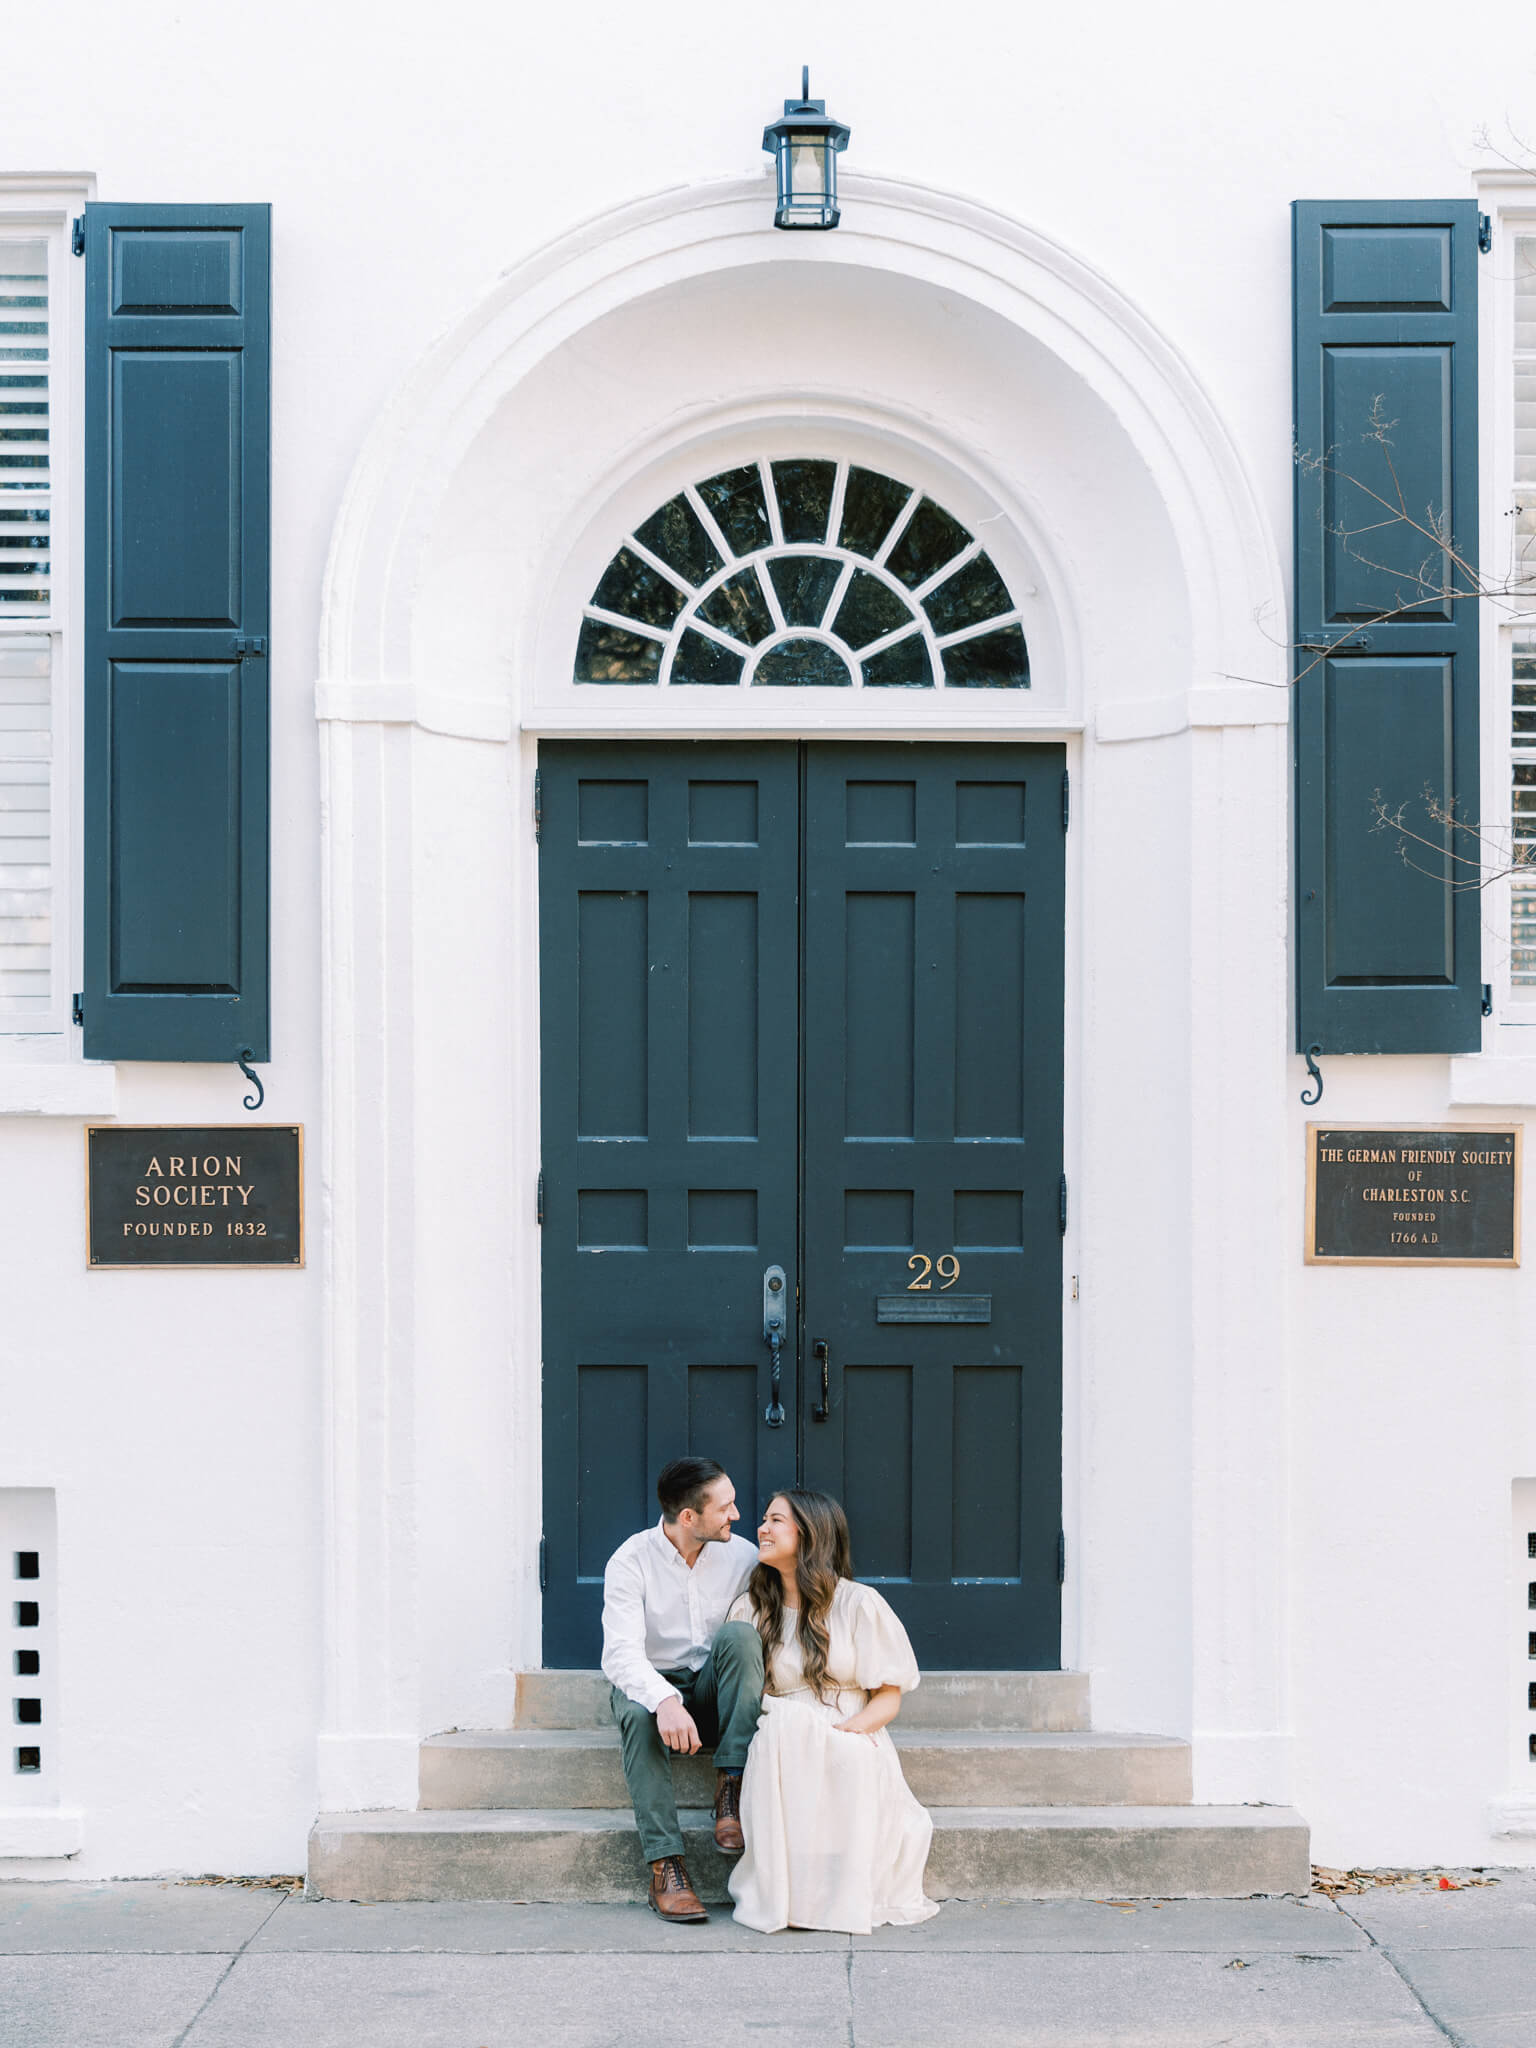 A man and woman smiling at each other while sitting on the stoop of a white building on Chalmer's Street for their Charleston engagement photos.